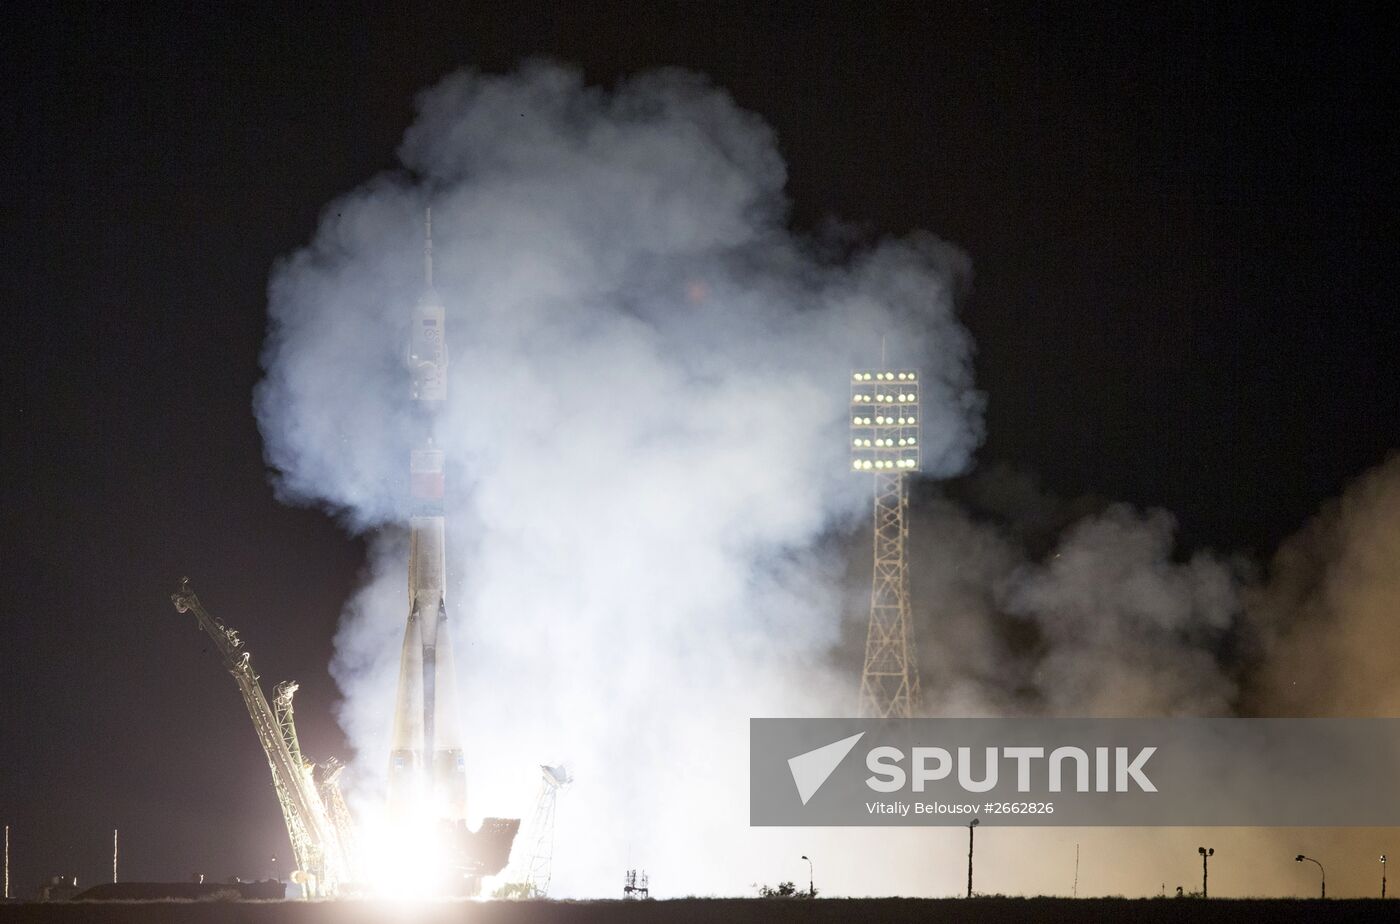 Launch of Soyuz TMA-17M from Baikonur Space Center